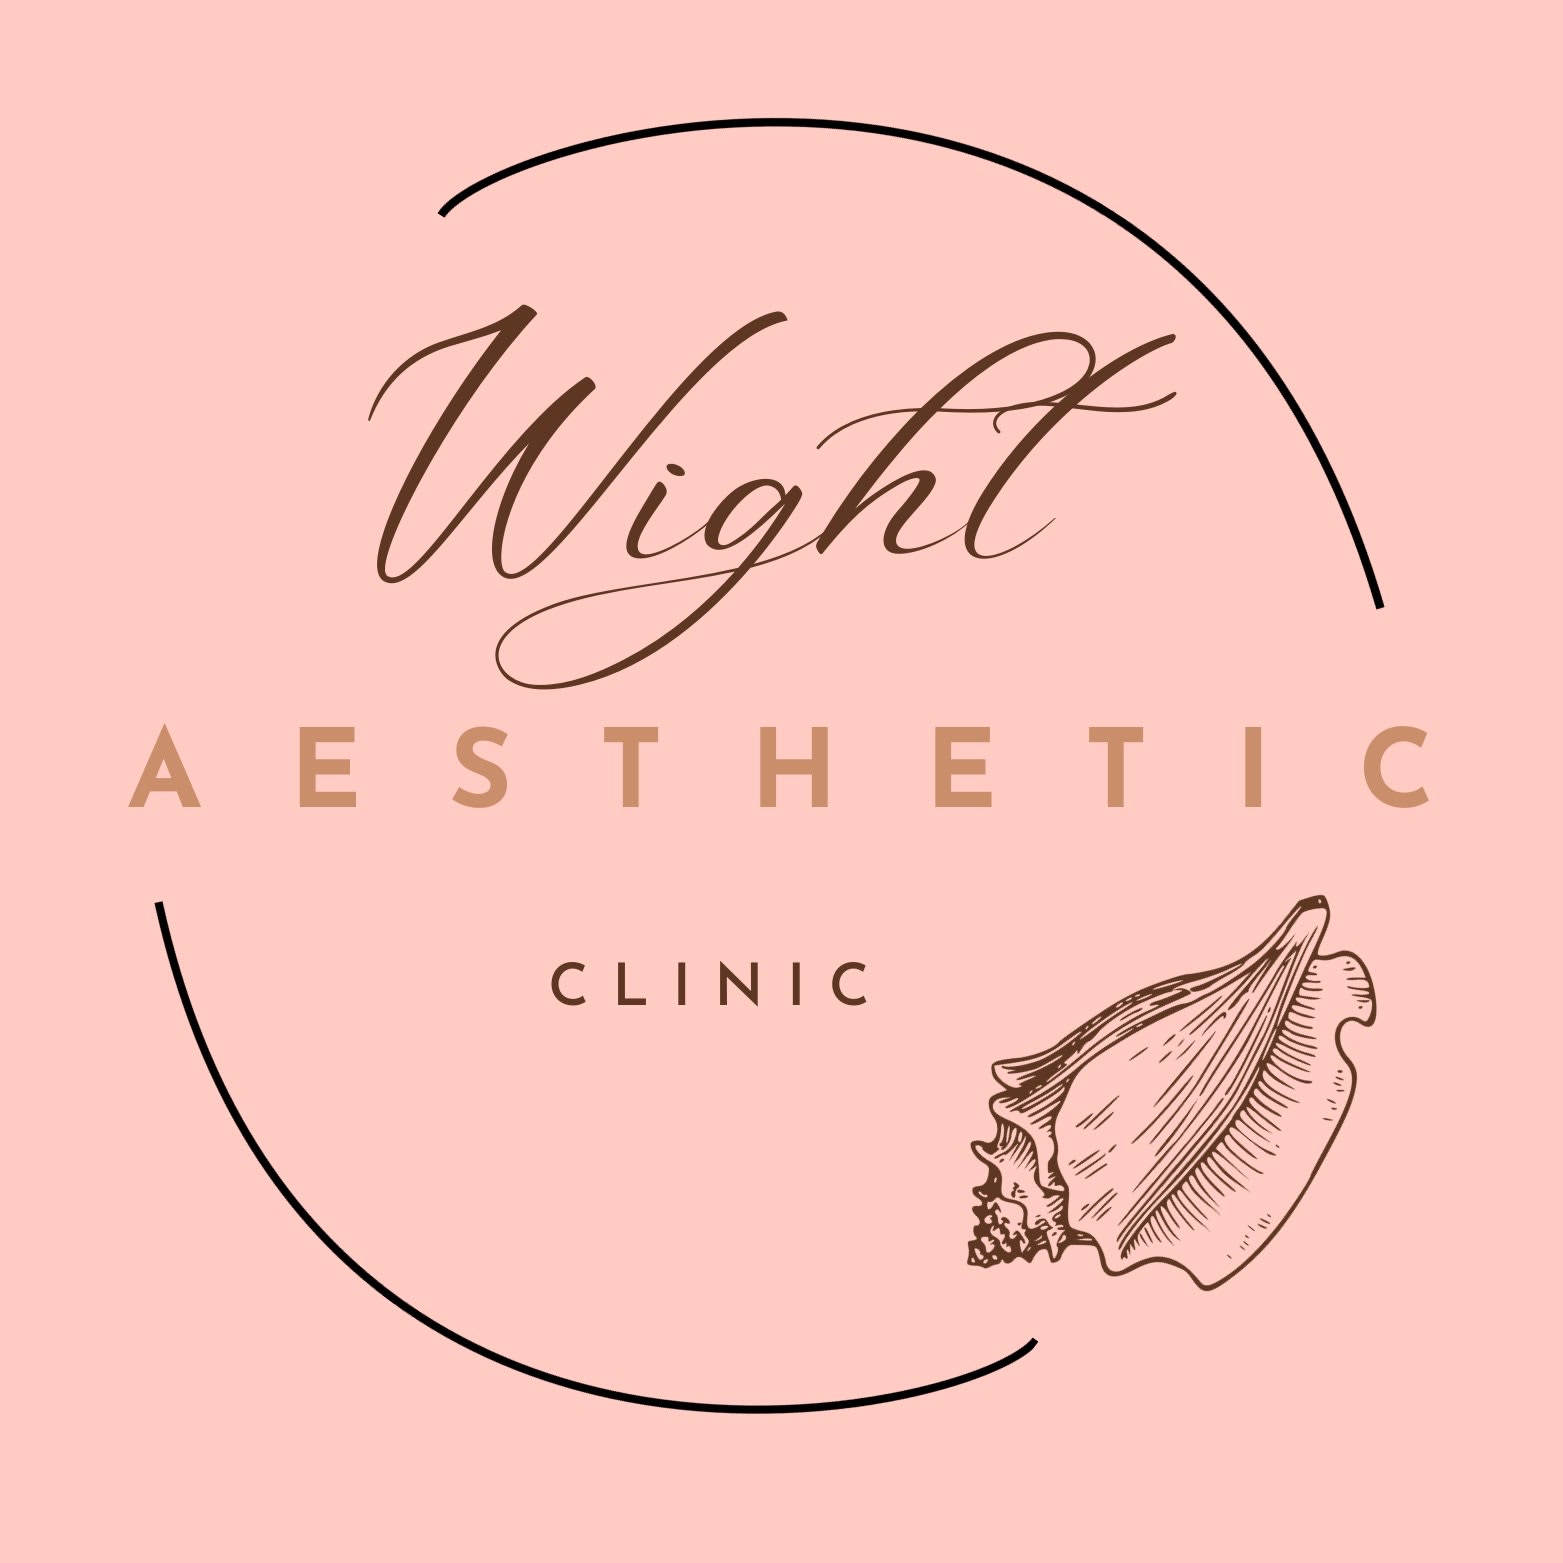 Wight Aesthetic Clinic Newport 01983 242370